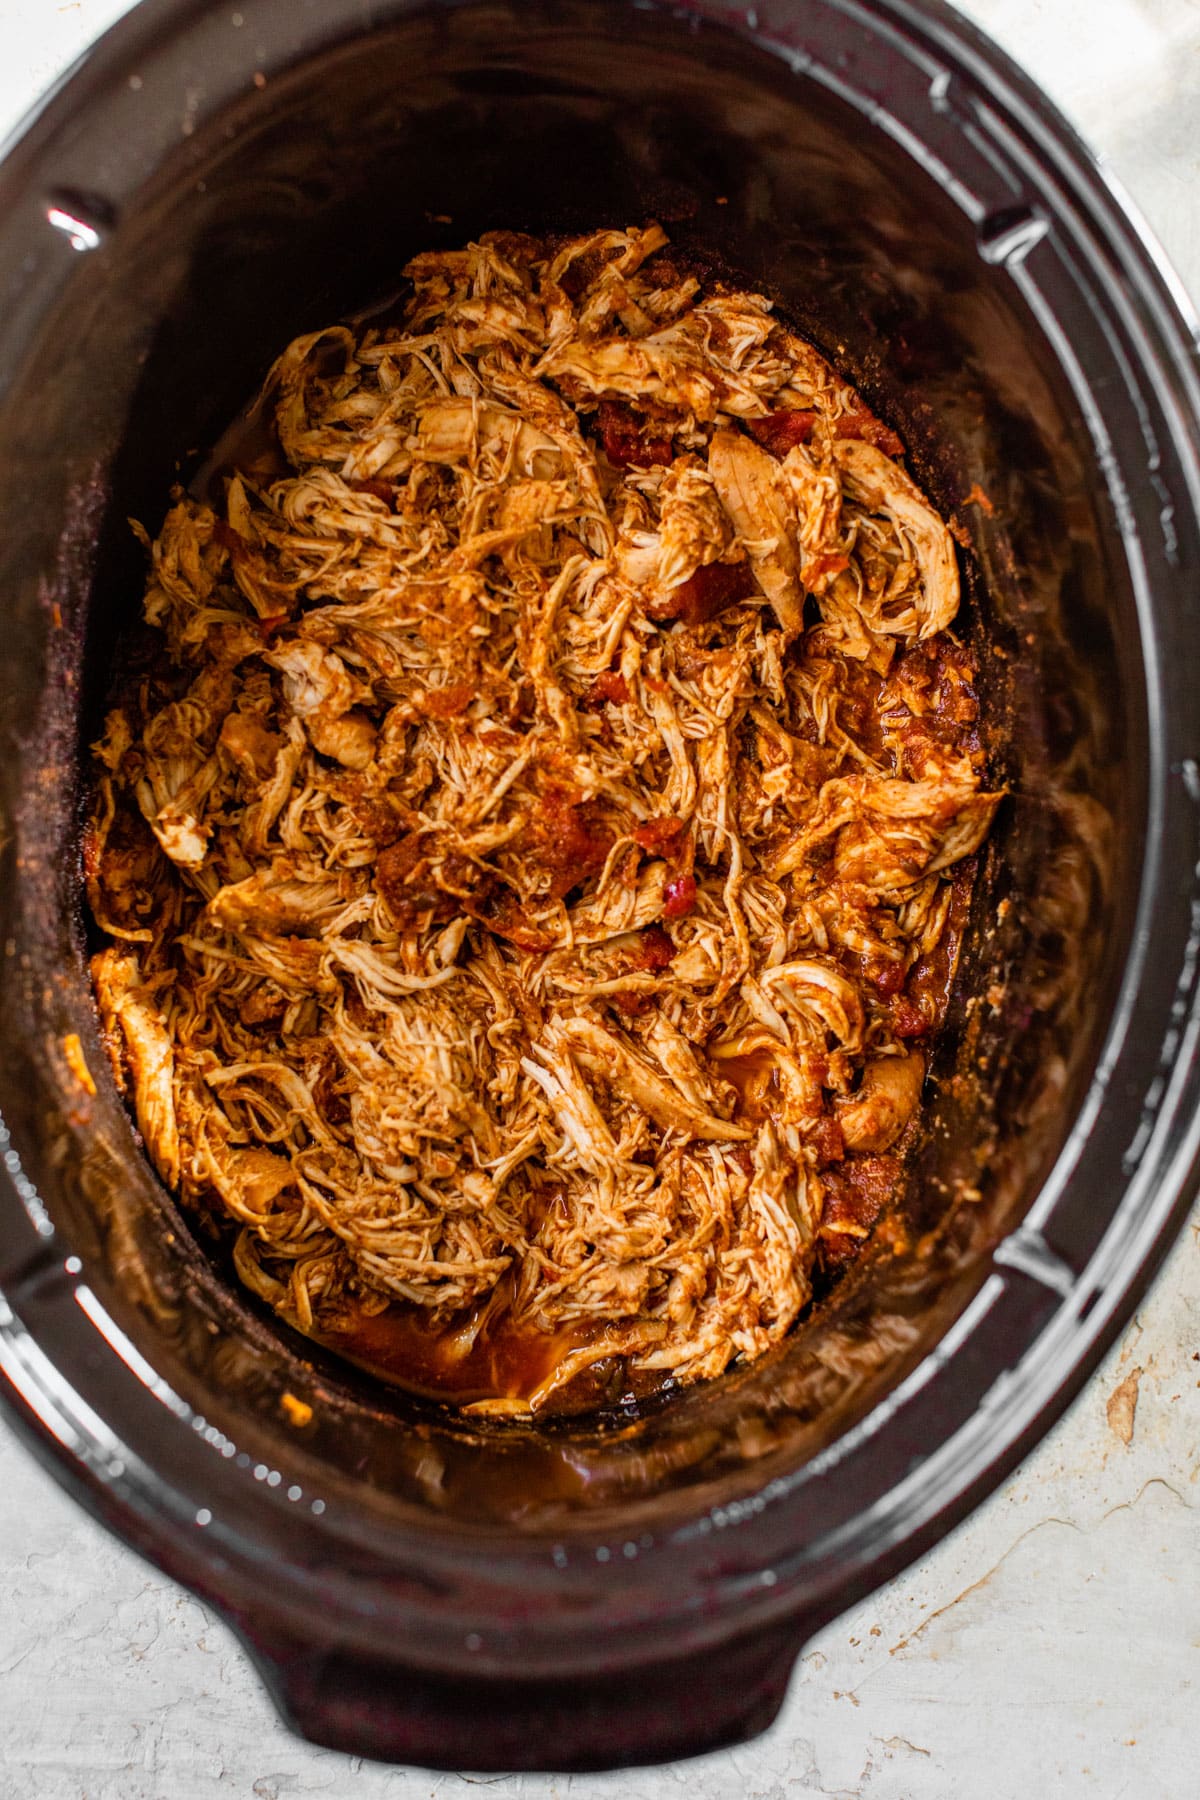 shredded cooked chicken in a red sauce in the crockpot